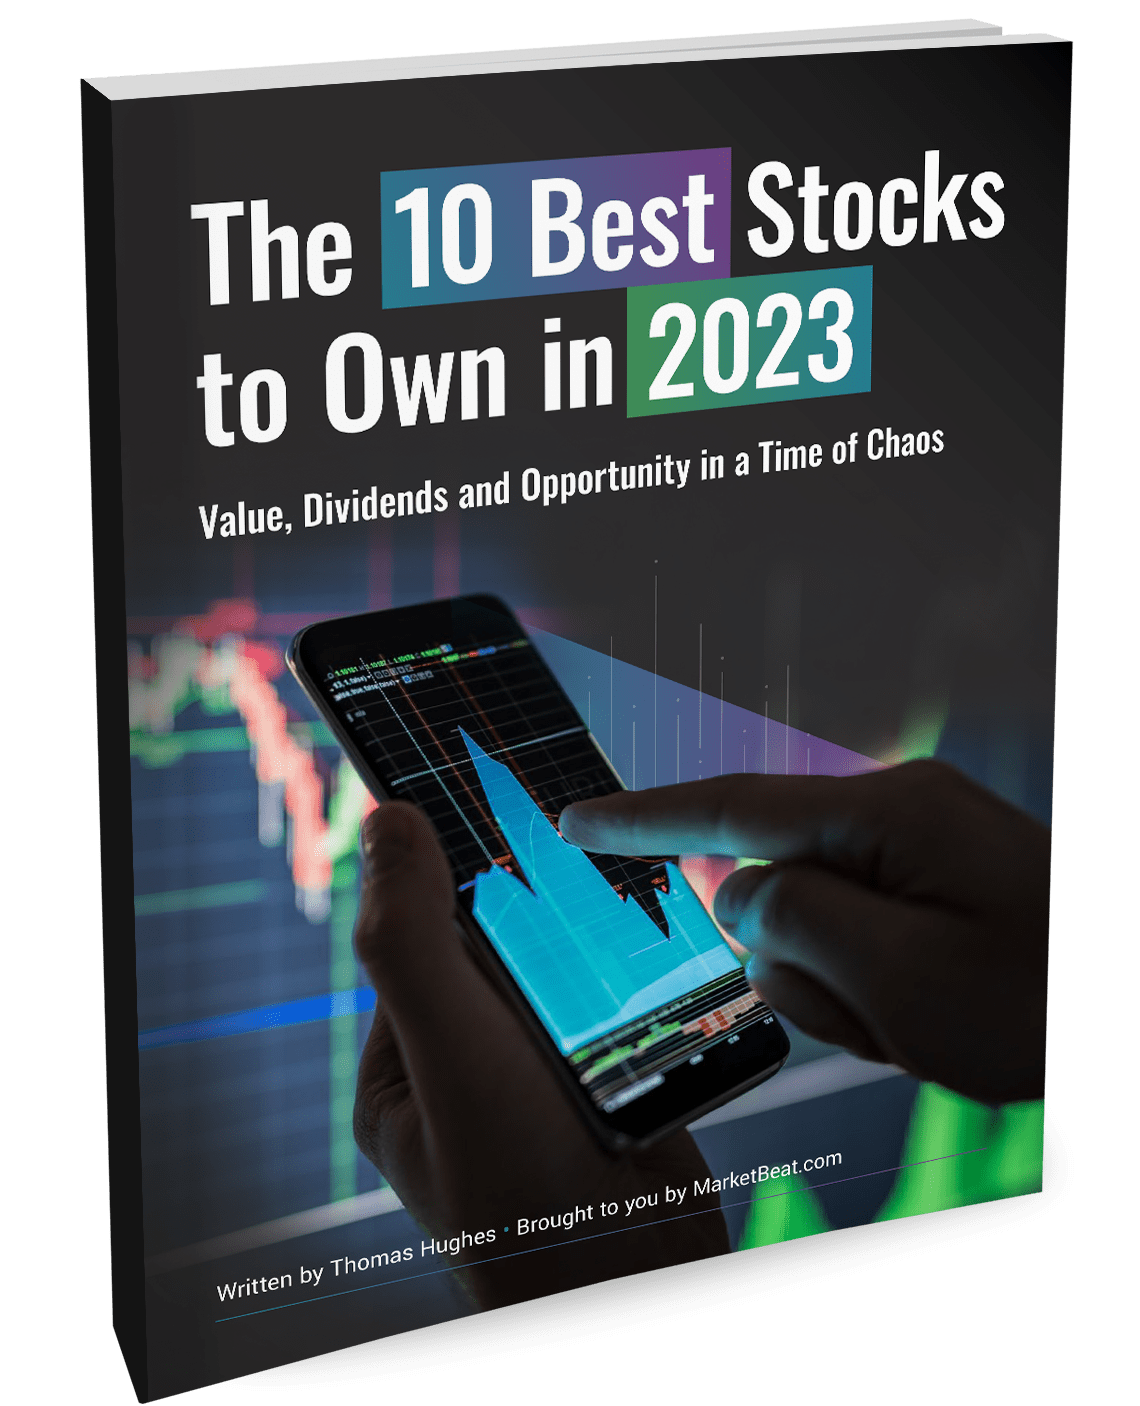 Top 10 Stocks to Own in 2023